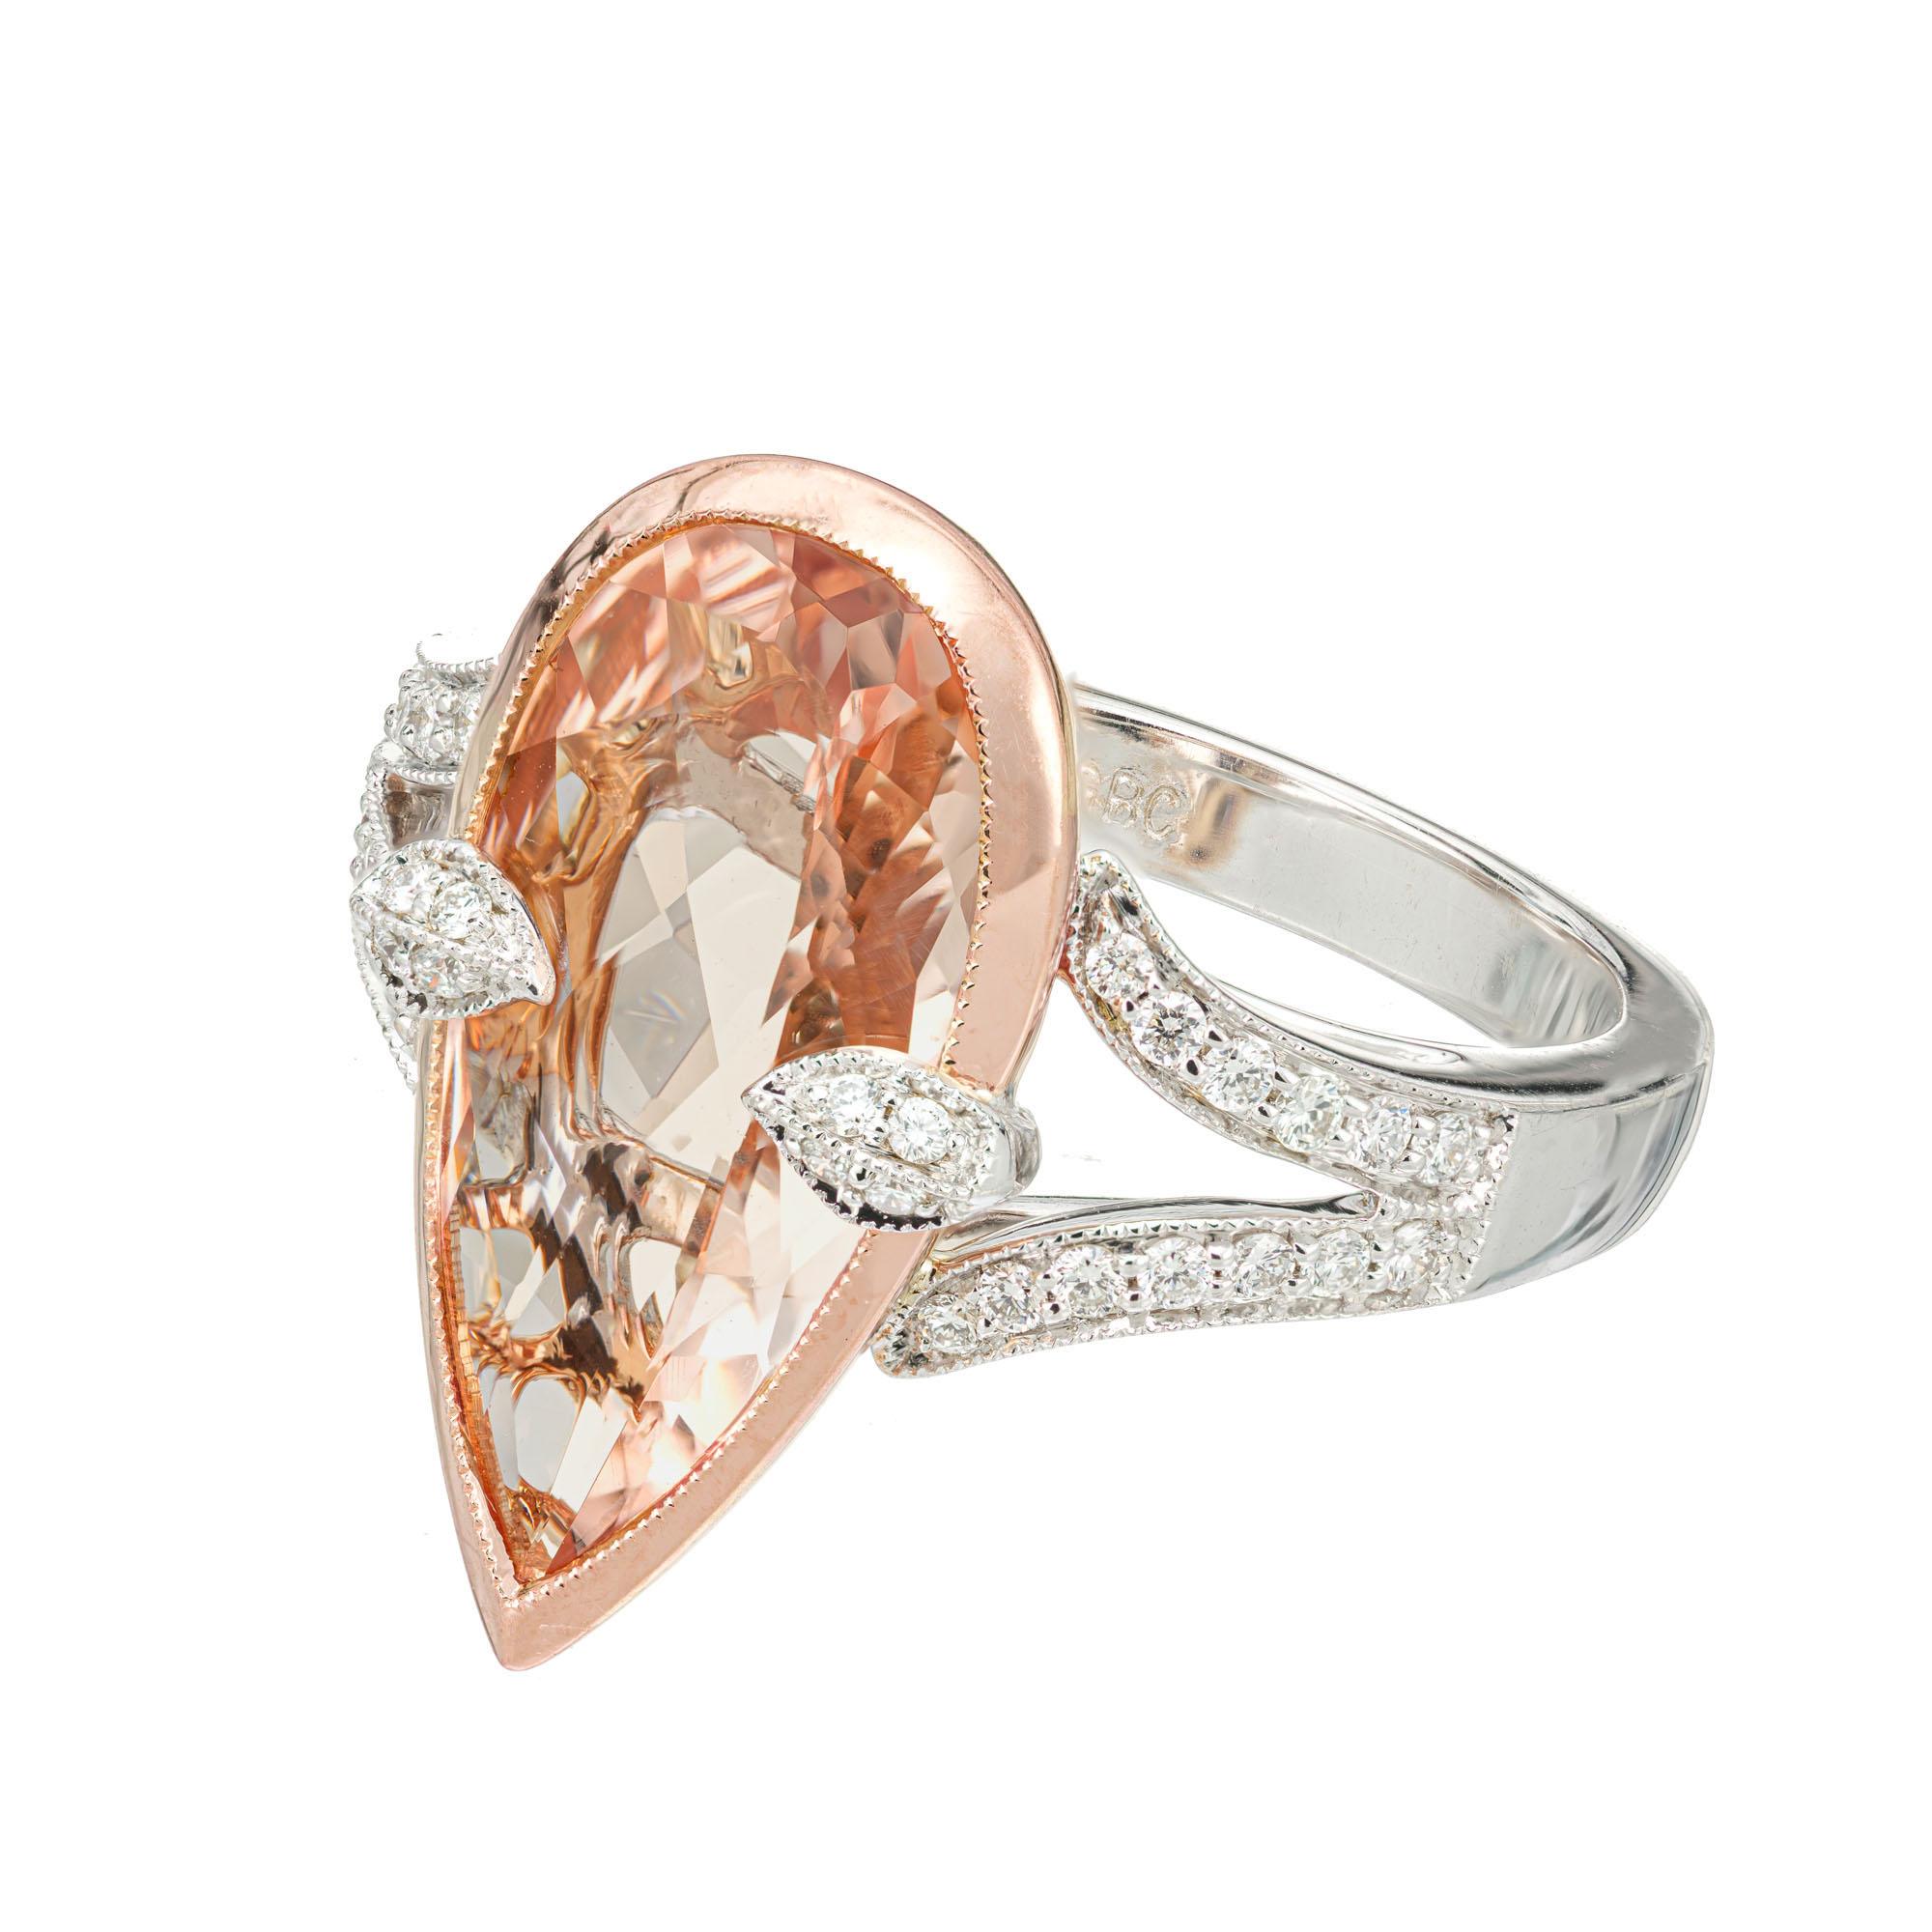 Morganite and diamond cocktail ring. 3.00 pear shape morganite center stone in a 18k rose gold bezel with 34 round brilliant cut diamonds in split shank 18k white gold setting, designed and crafted in the Peter Suchy workshop

1 pear shape